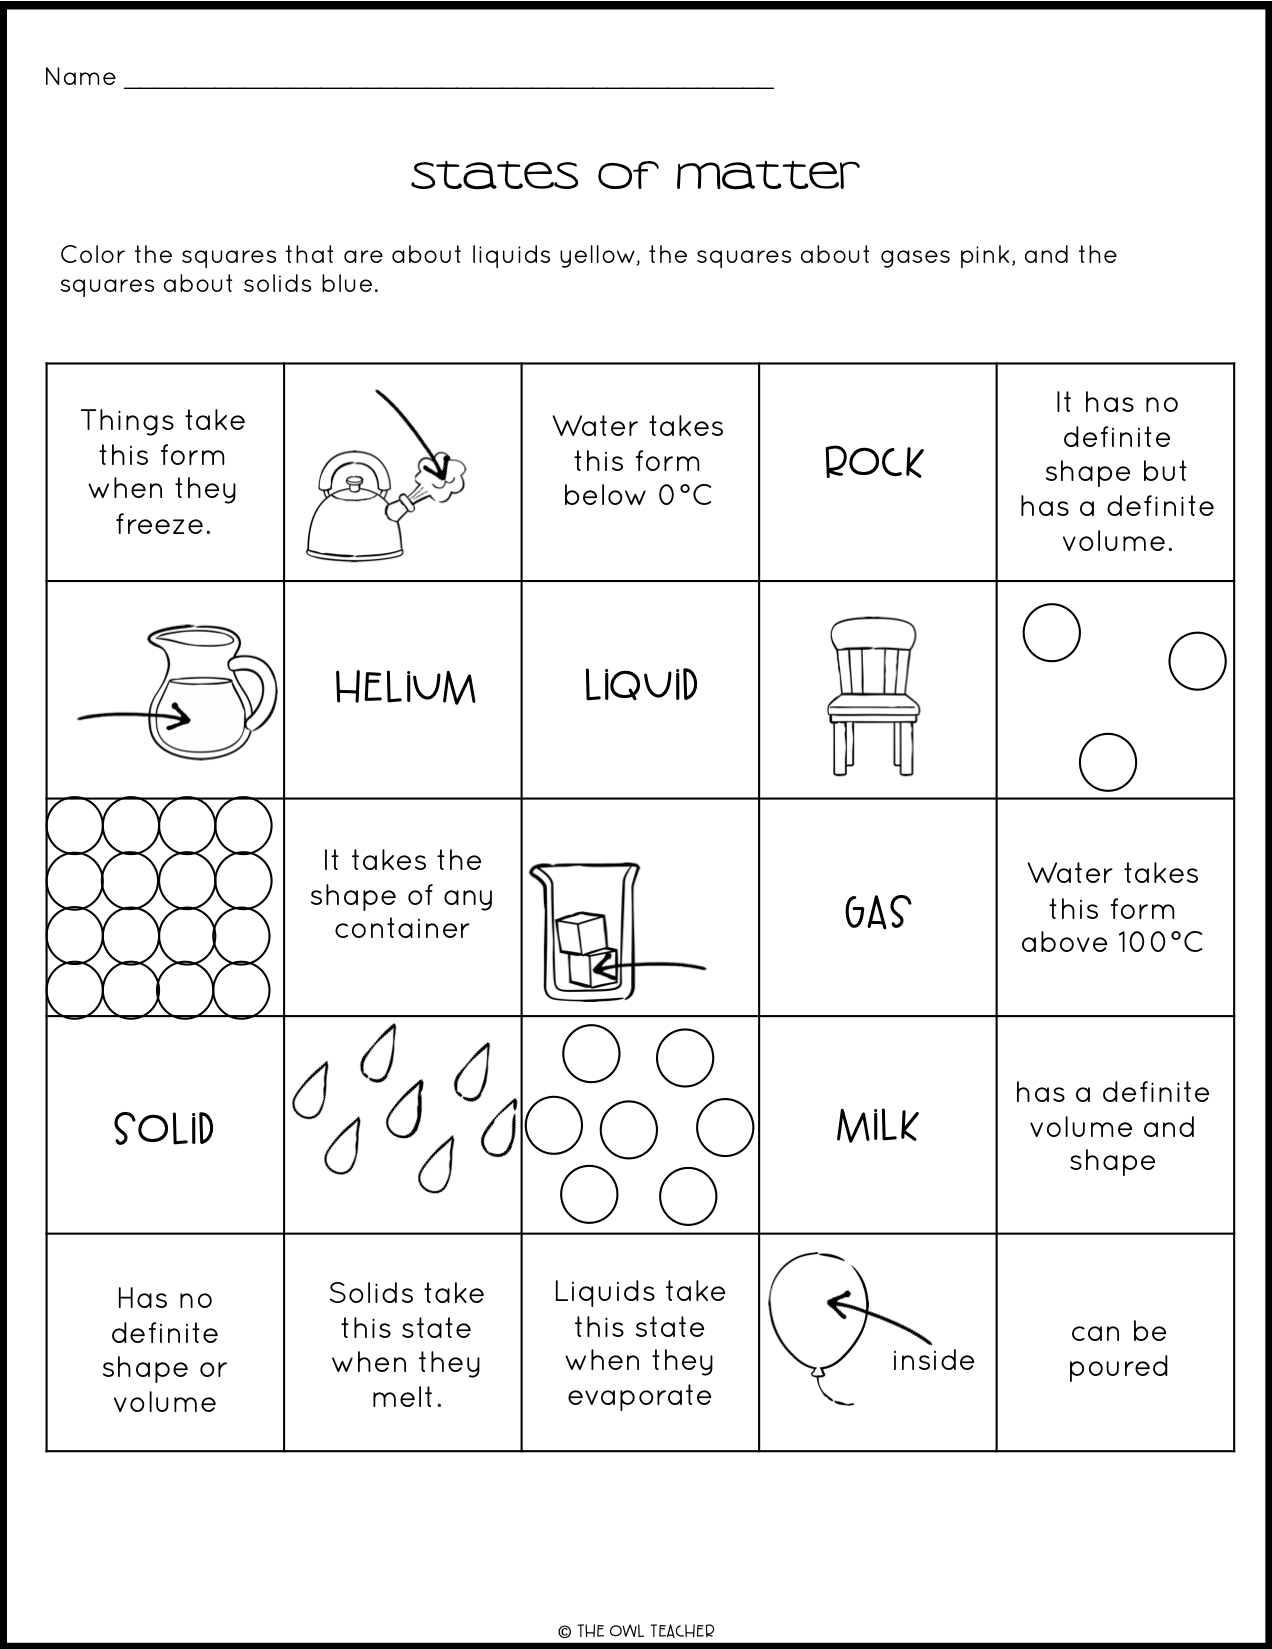 States of Matter (Solid, liquid, gas) Craftivity - The Owl Teacher Within Solid Liquid Gas Worksheet